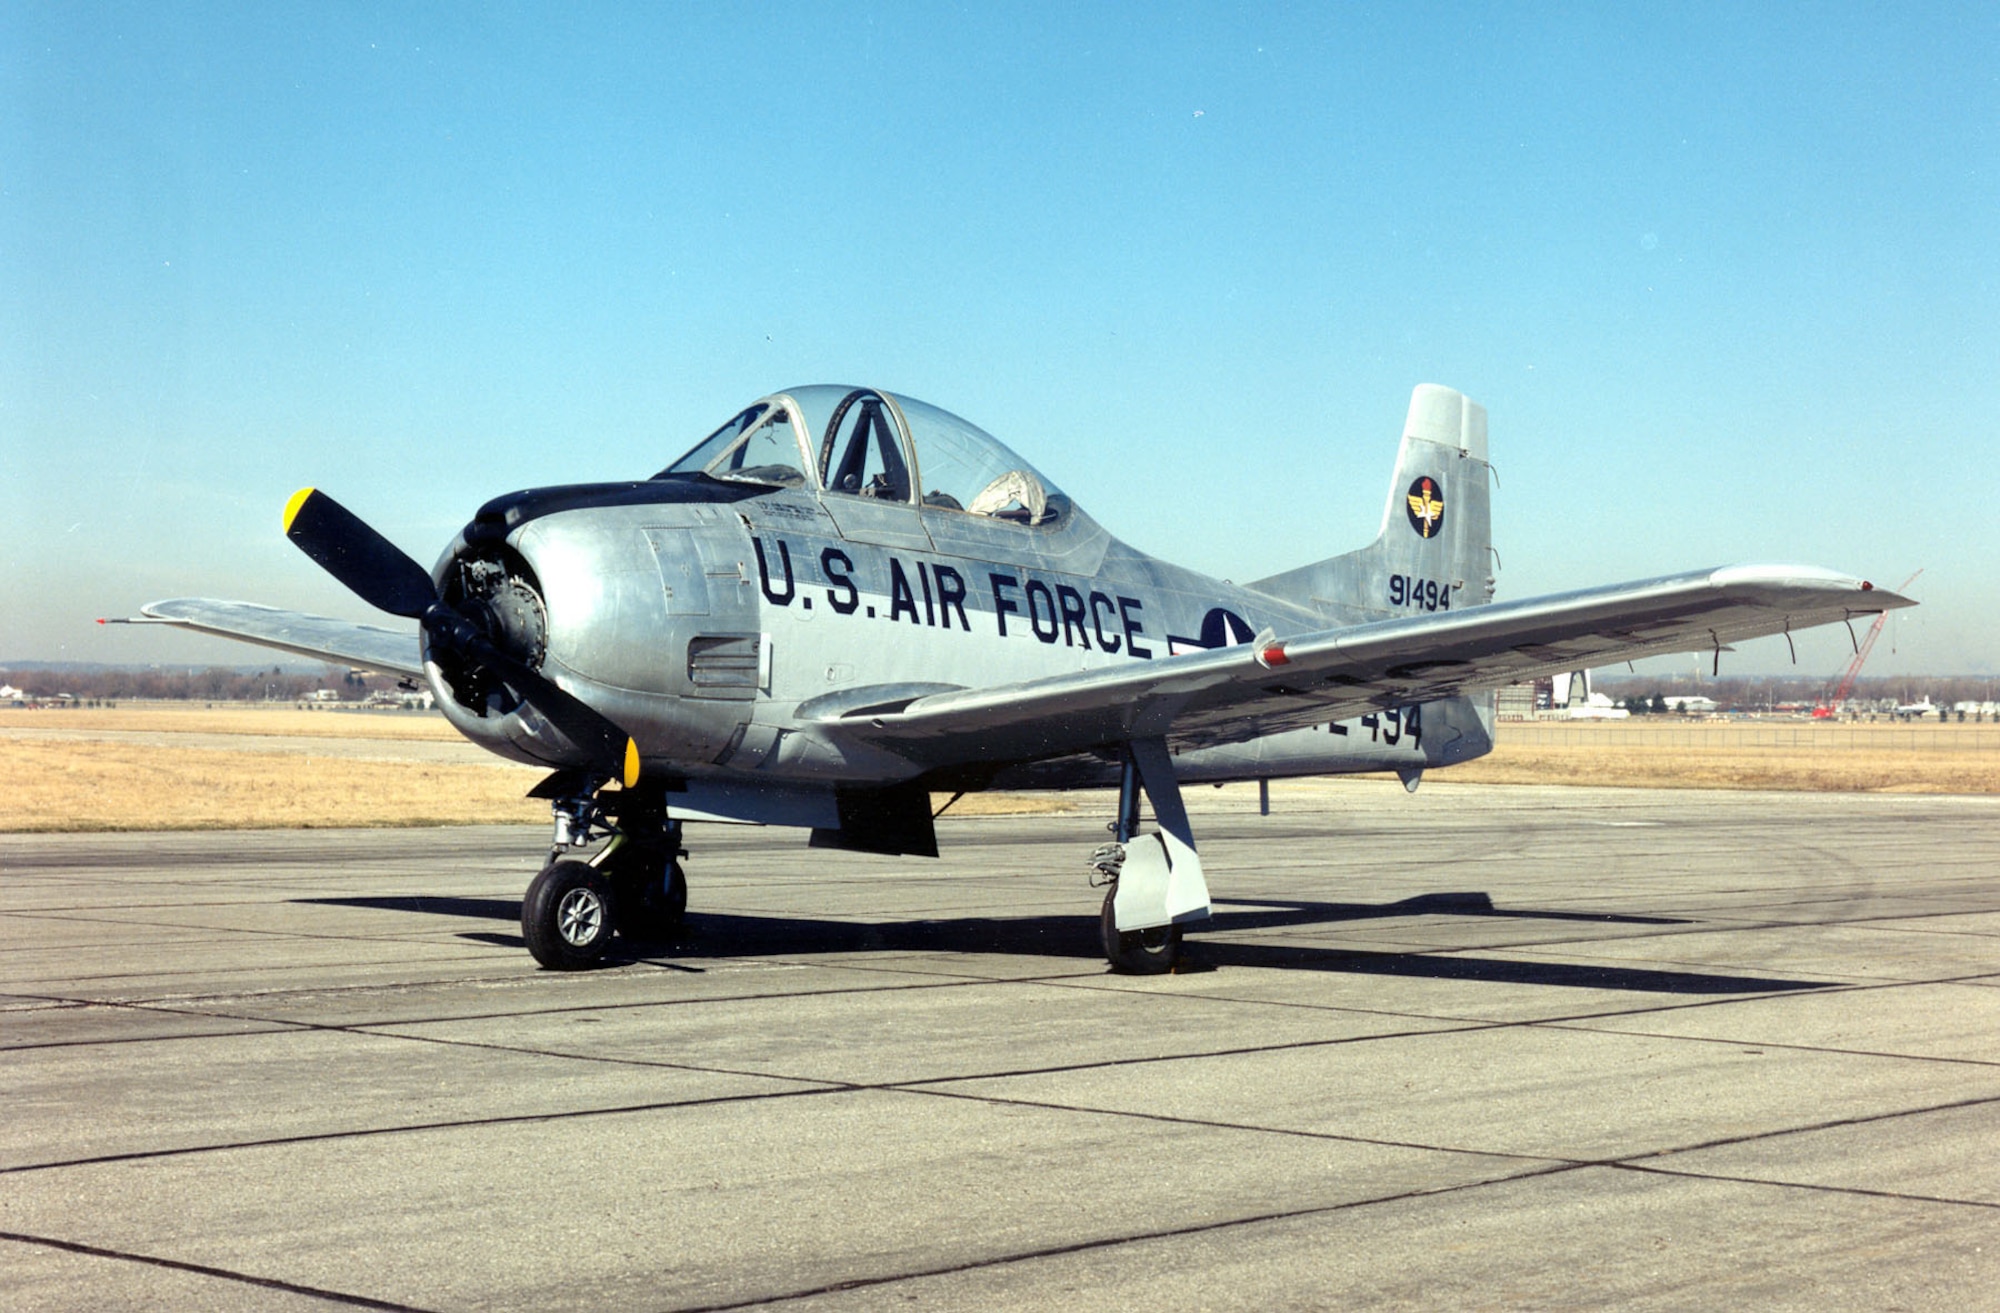 DAYTON, Ohio -- North American T-28A Trojan at the National Museum of the United States Air Force. (U.S. Air Force photo)